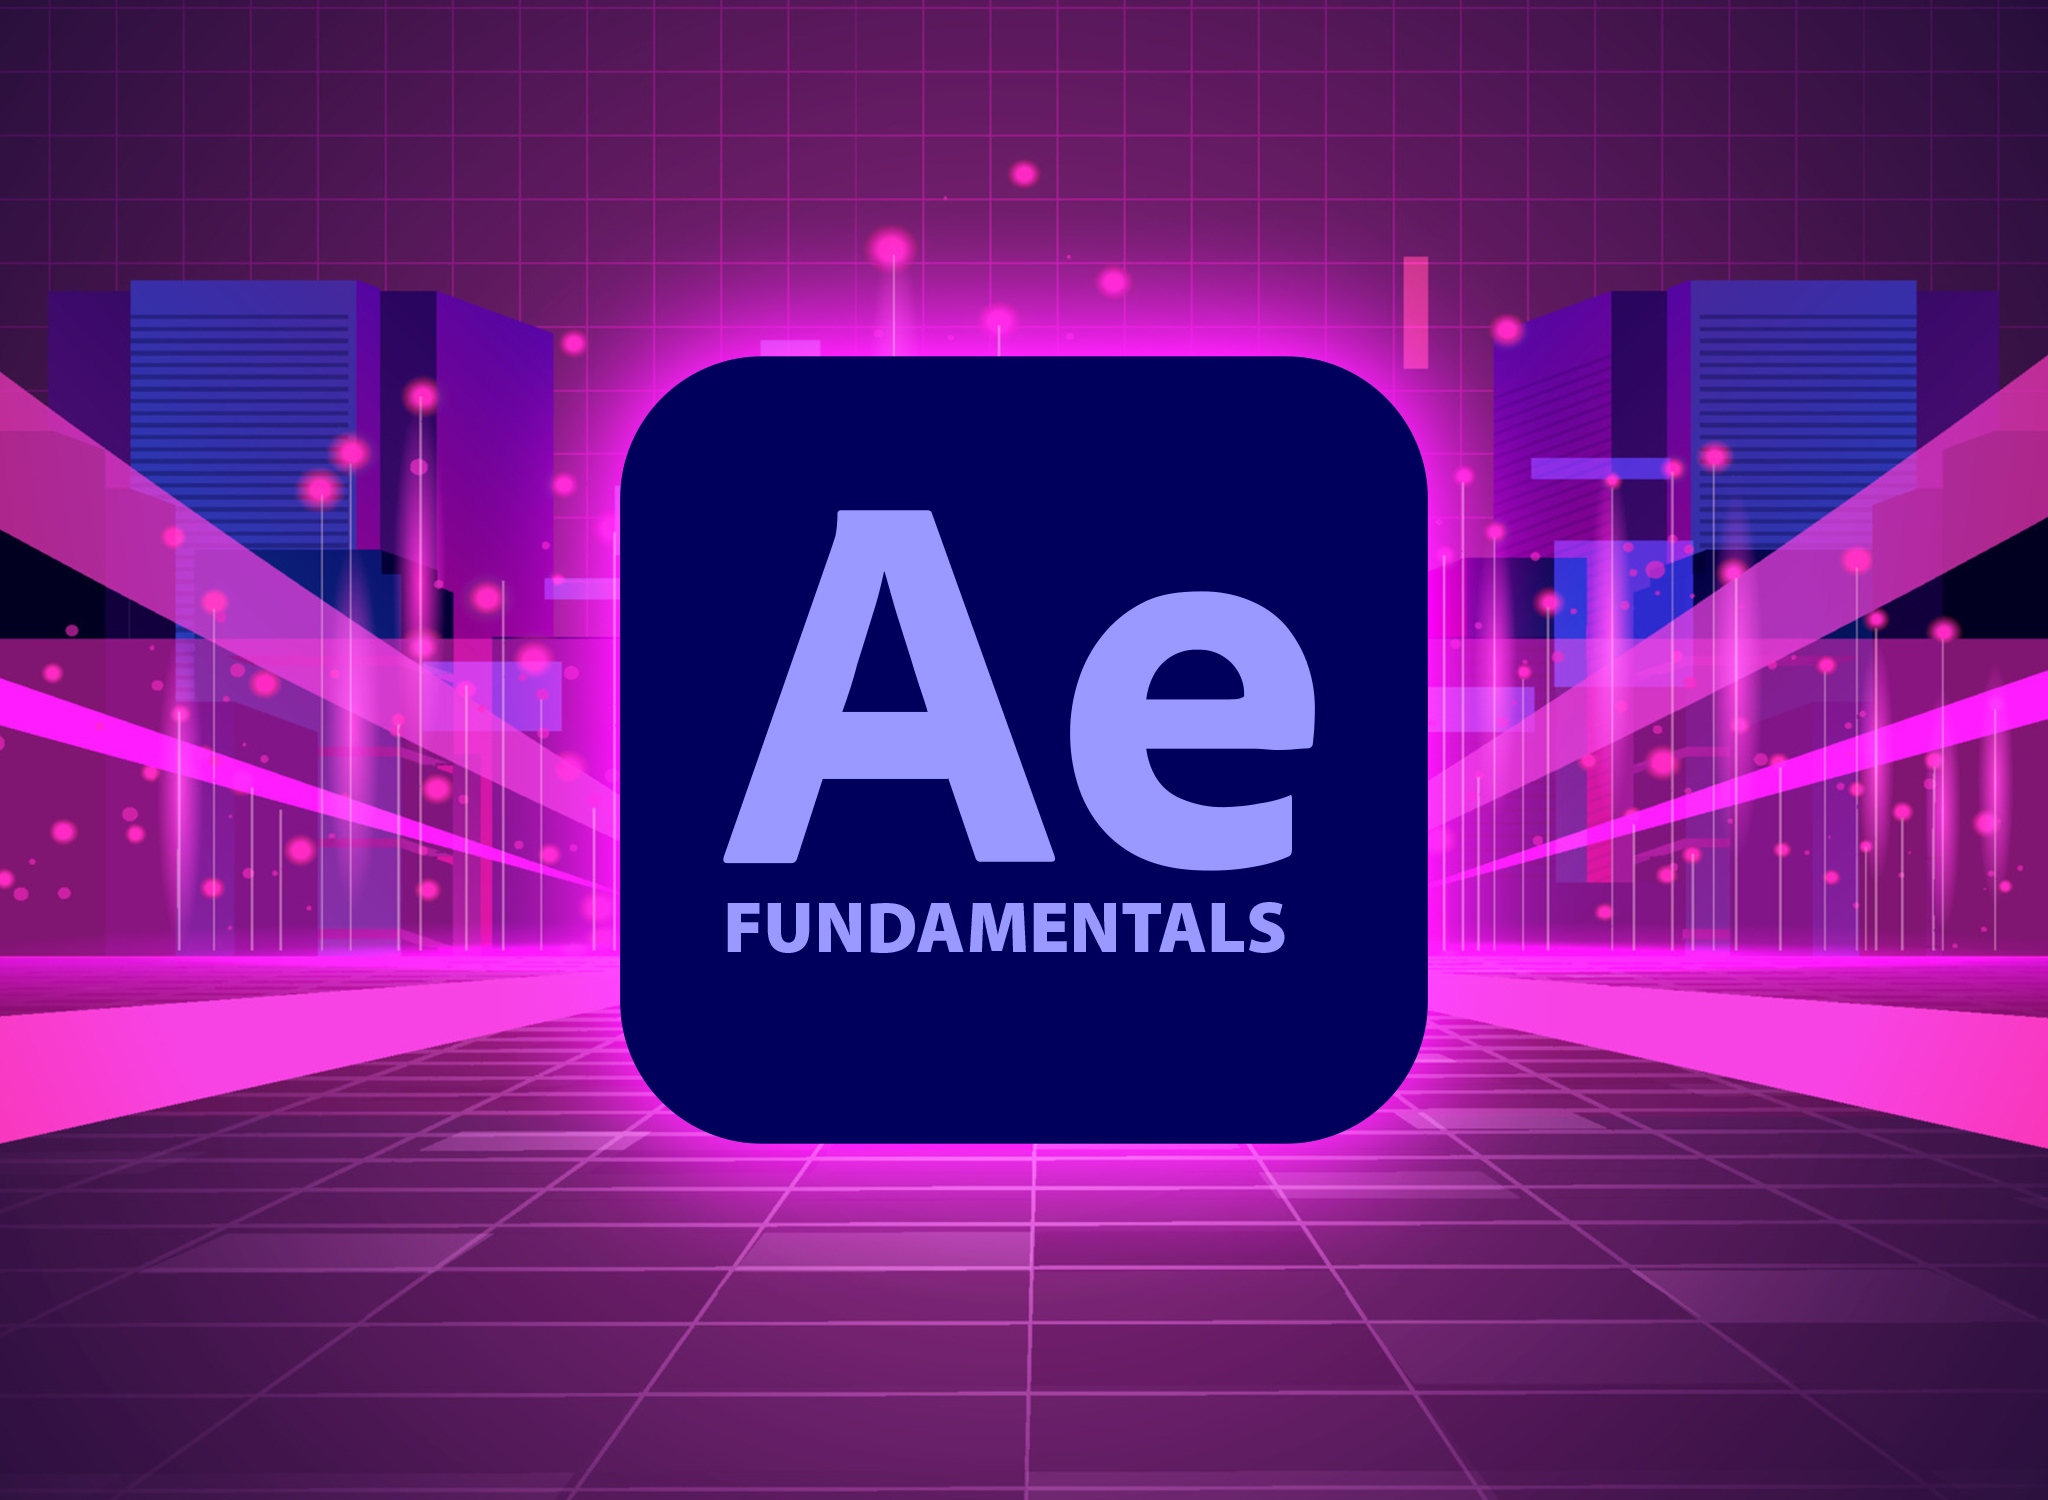 Come Learn Adobe After Effects!